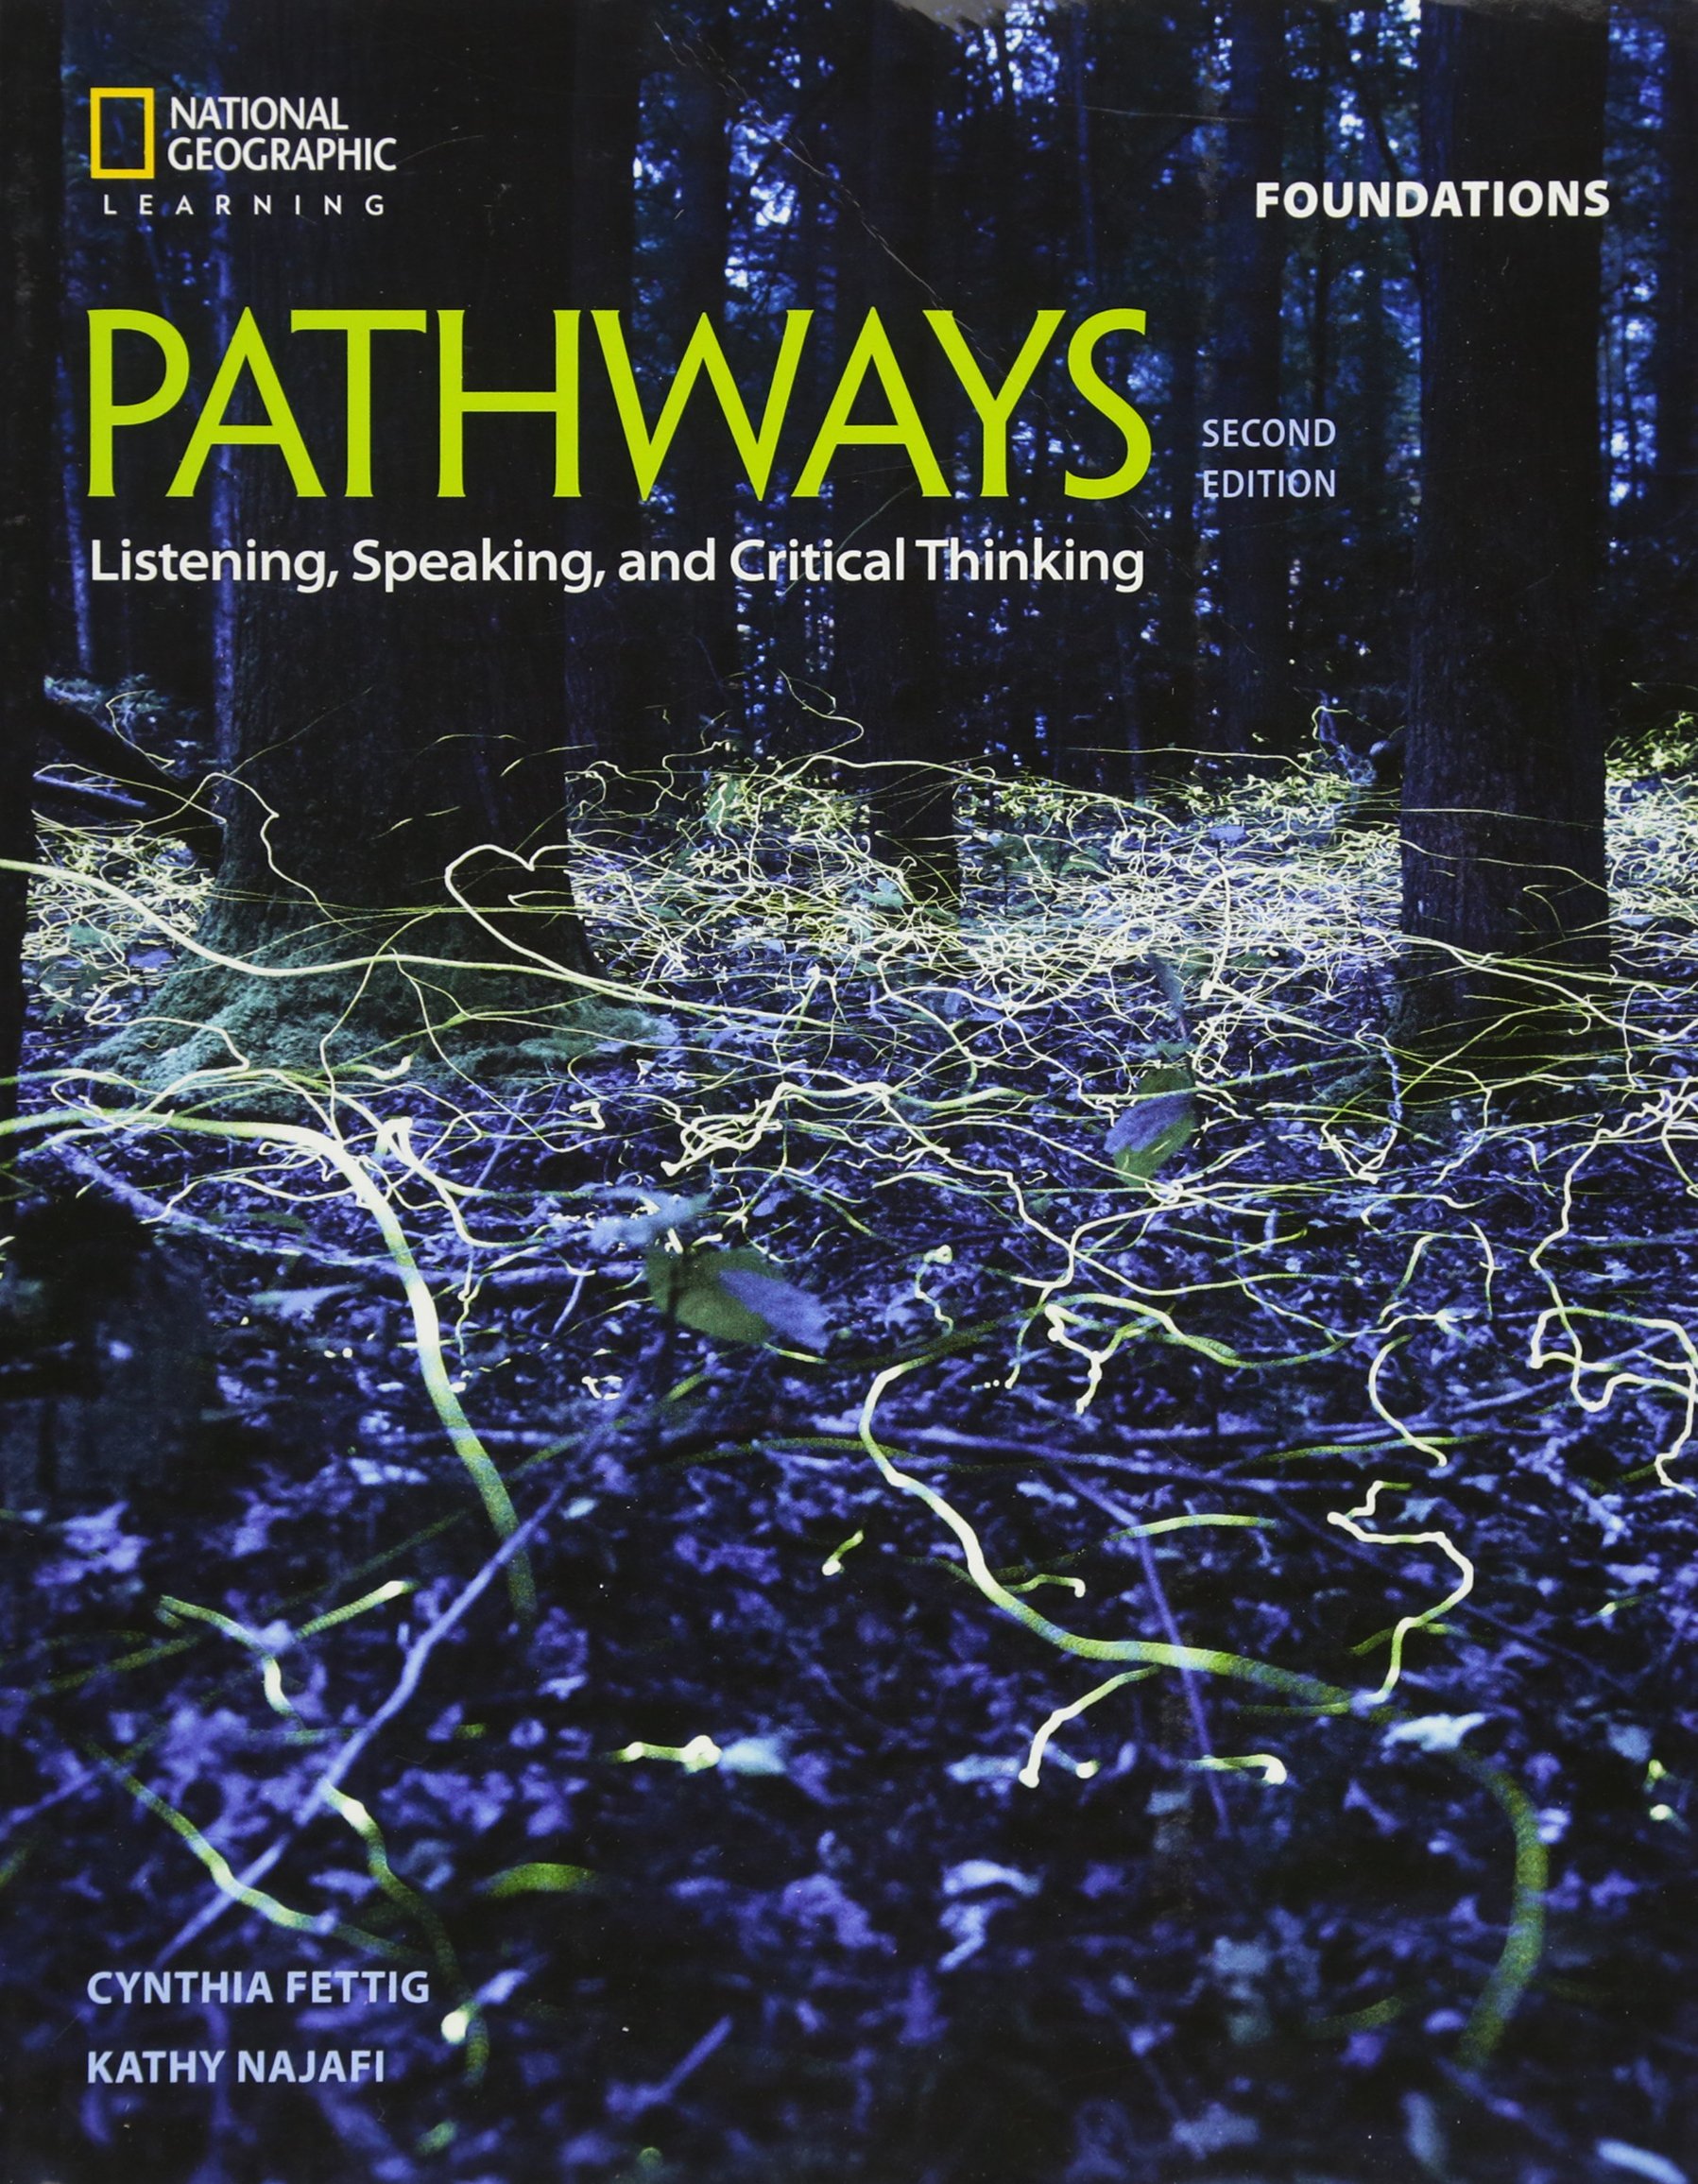 pathways listening speaking and critical thinking 4 audio